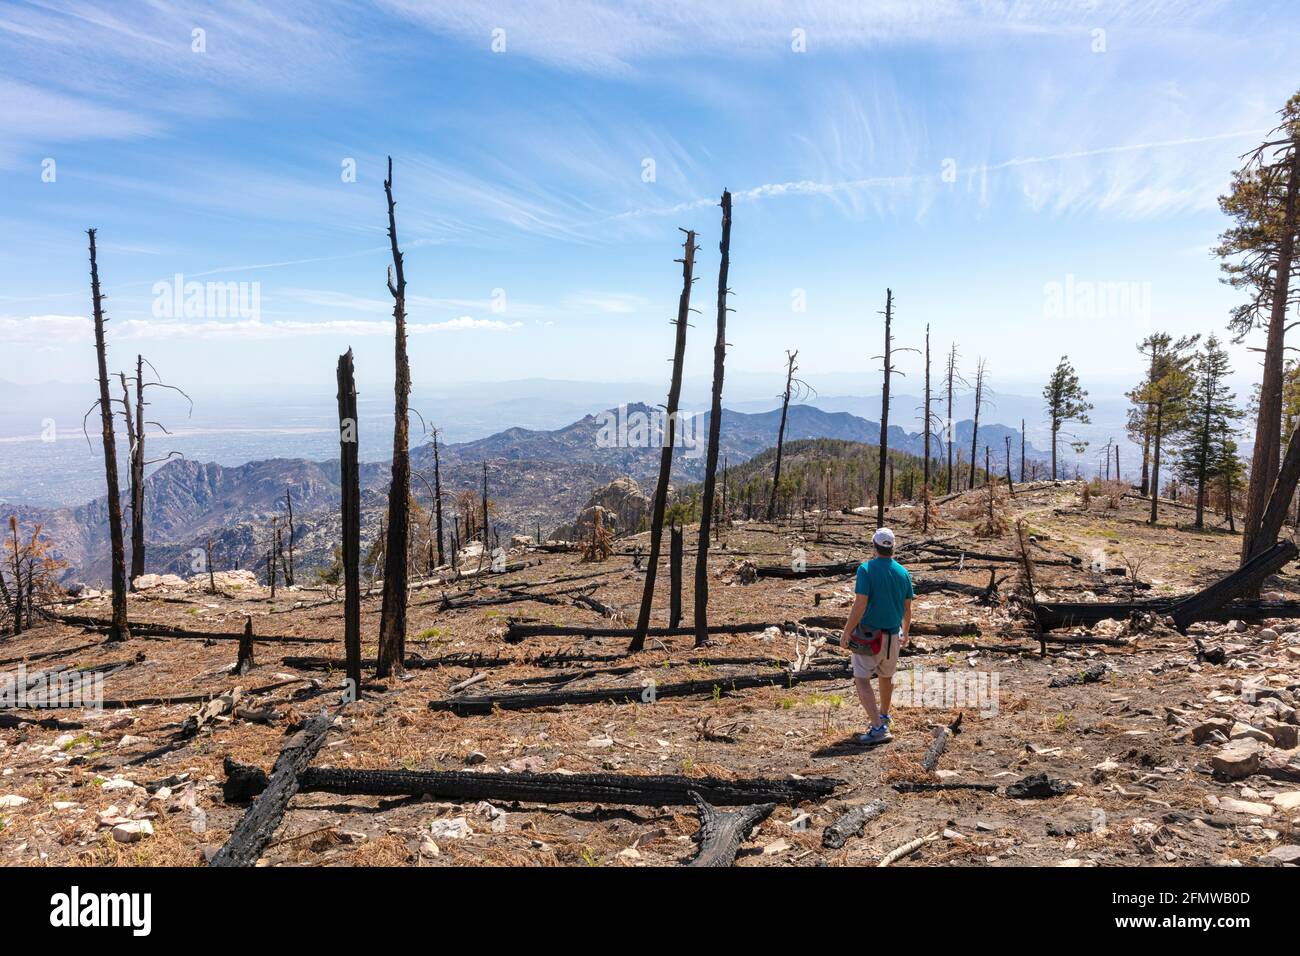 Burnt trees in decimated forest atop Mt. Lemmon, Santa Catalina Mountains, near Tucson (in the distance), Arizona. Stock Photo